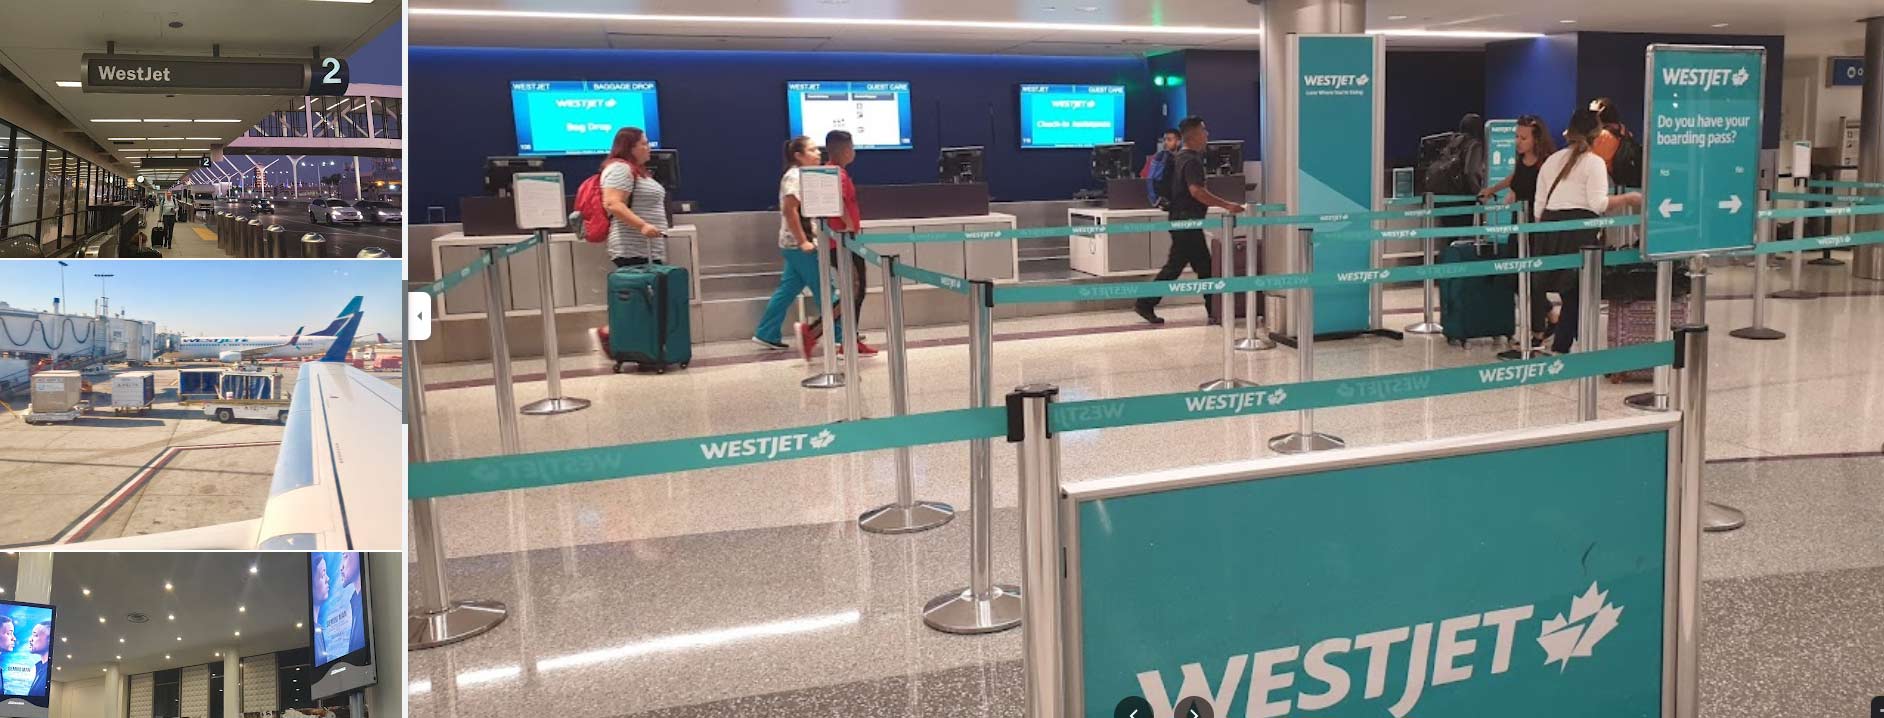 WestJet Airlines lax airports